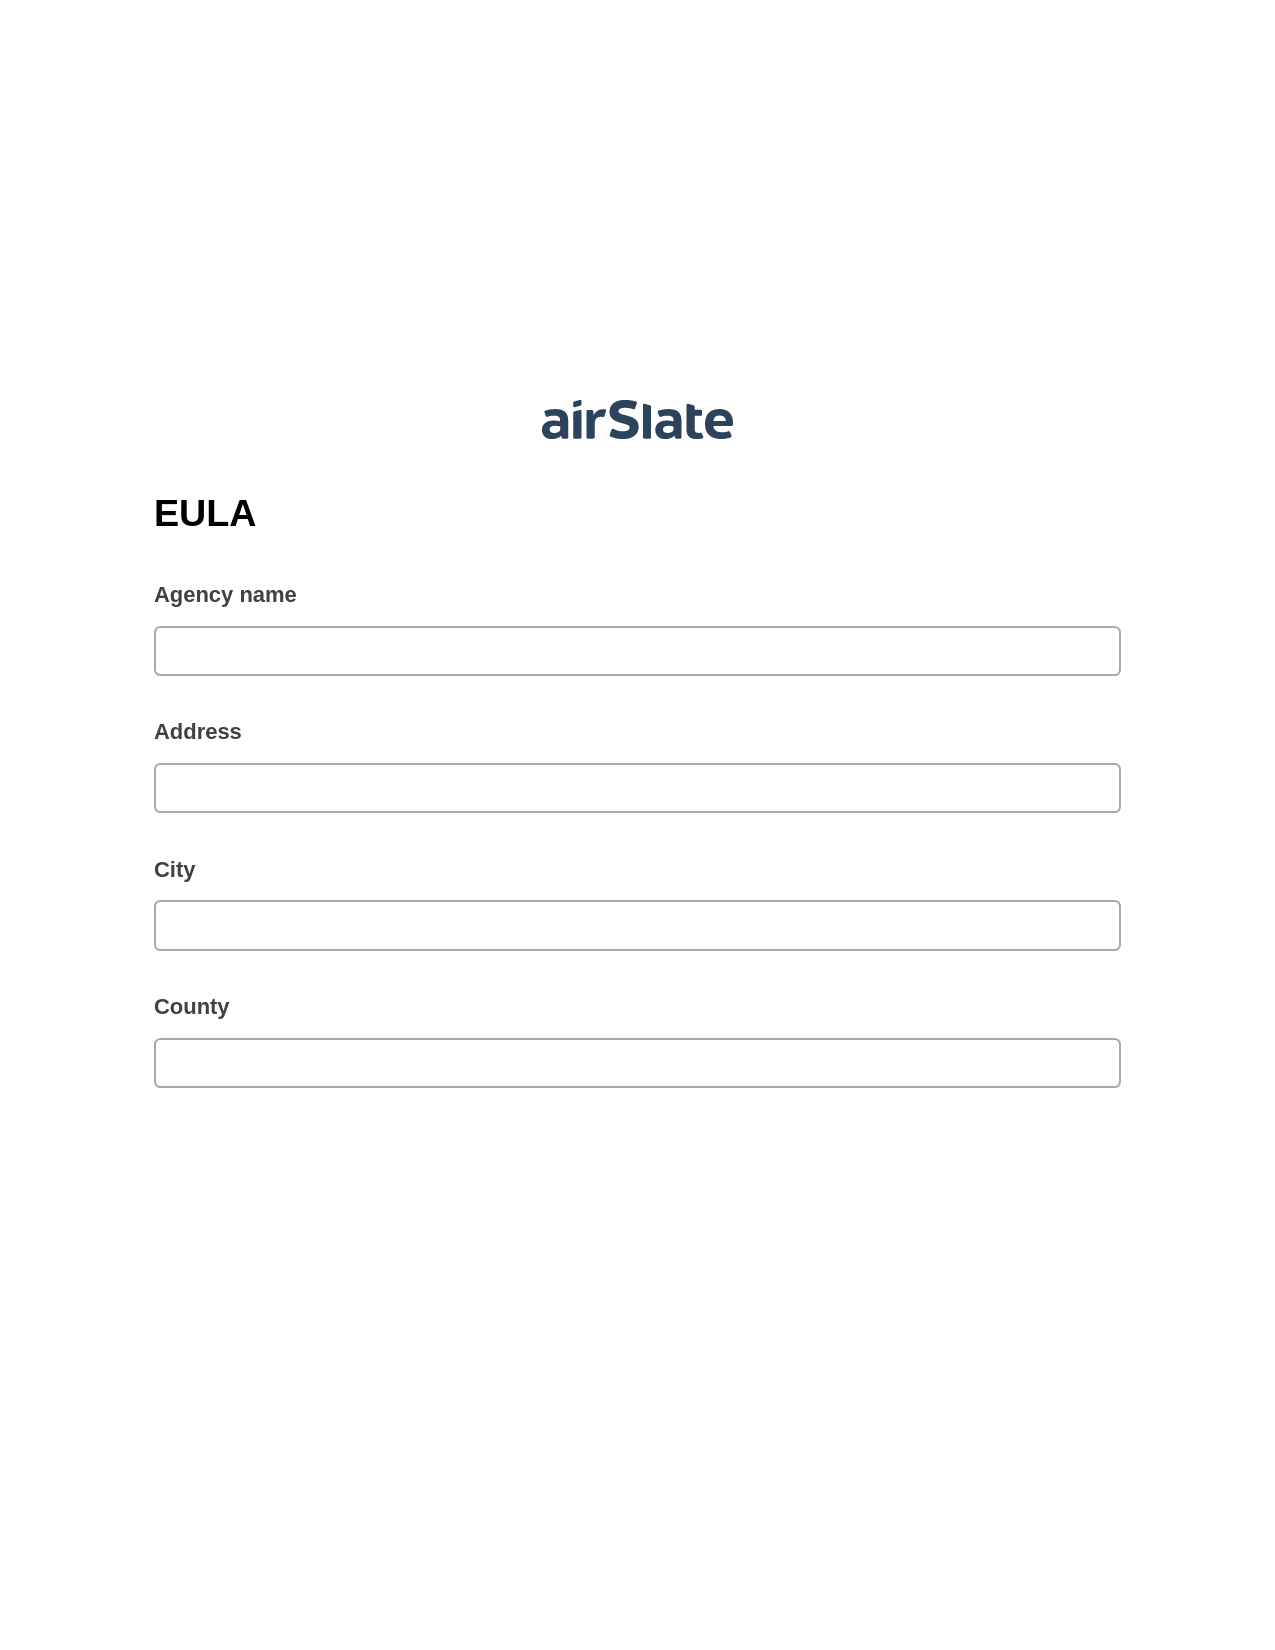 EULA Pre-fill from Google Sheet Dropdown Options Bot, Send a Slate with Roles Bot, Google Drive Bot